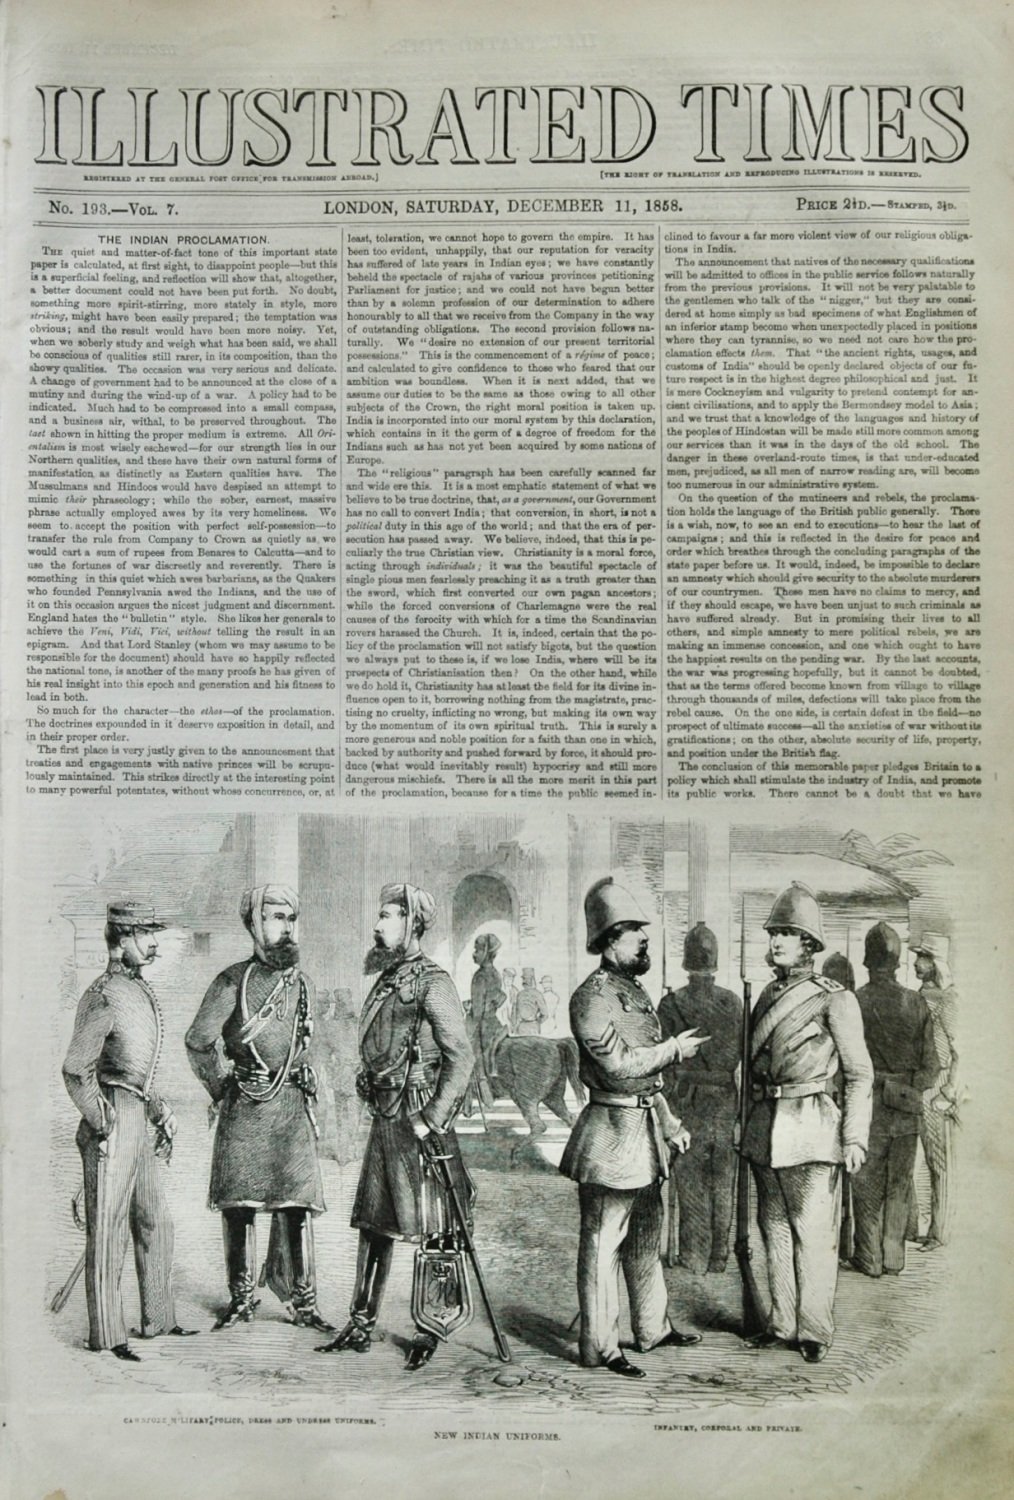 Illustrated Times, December 11, 1858